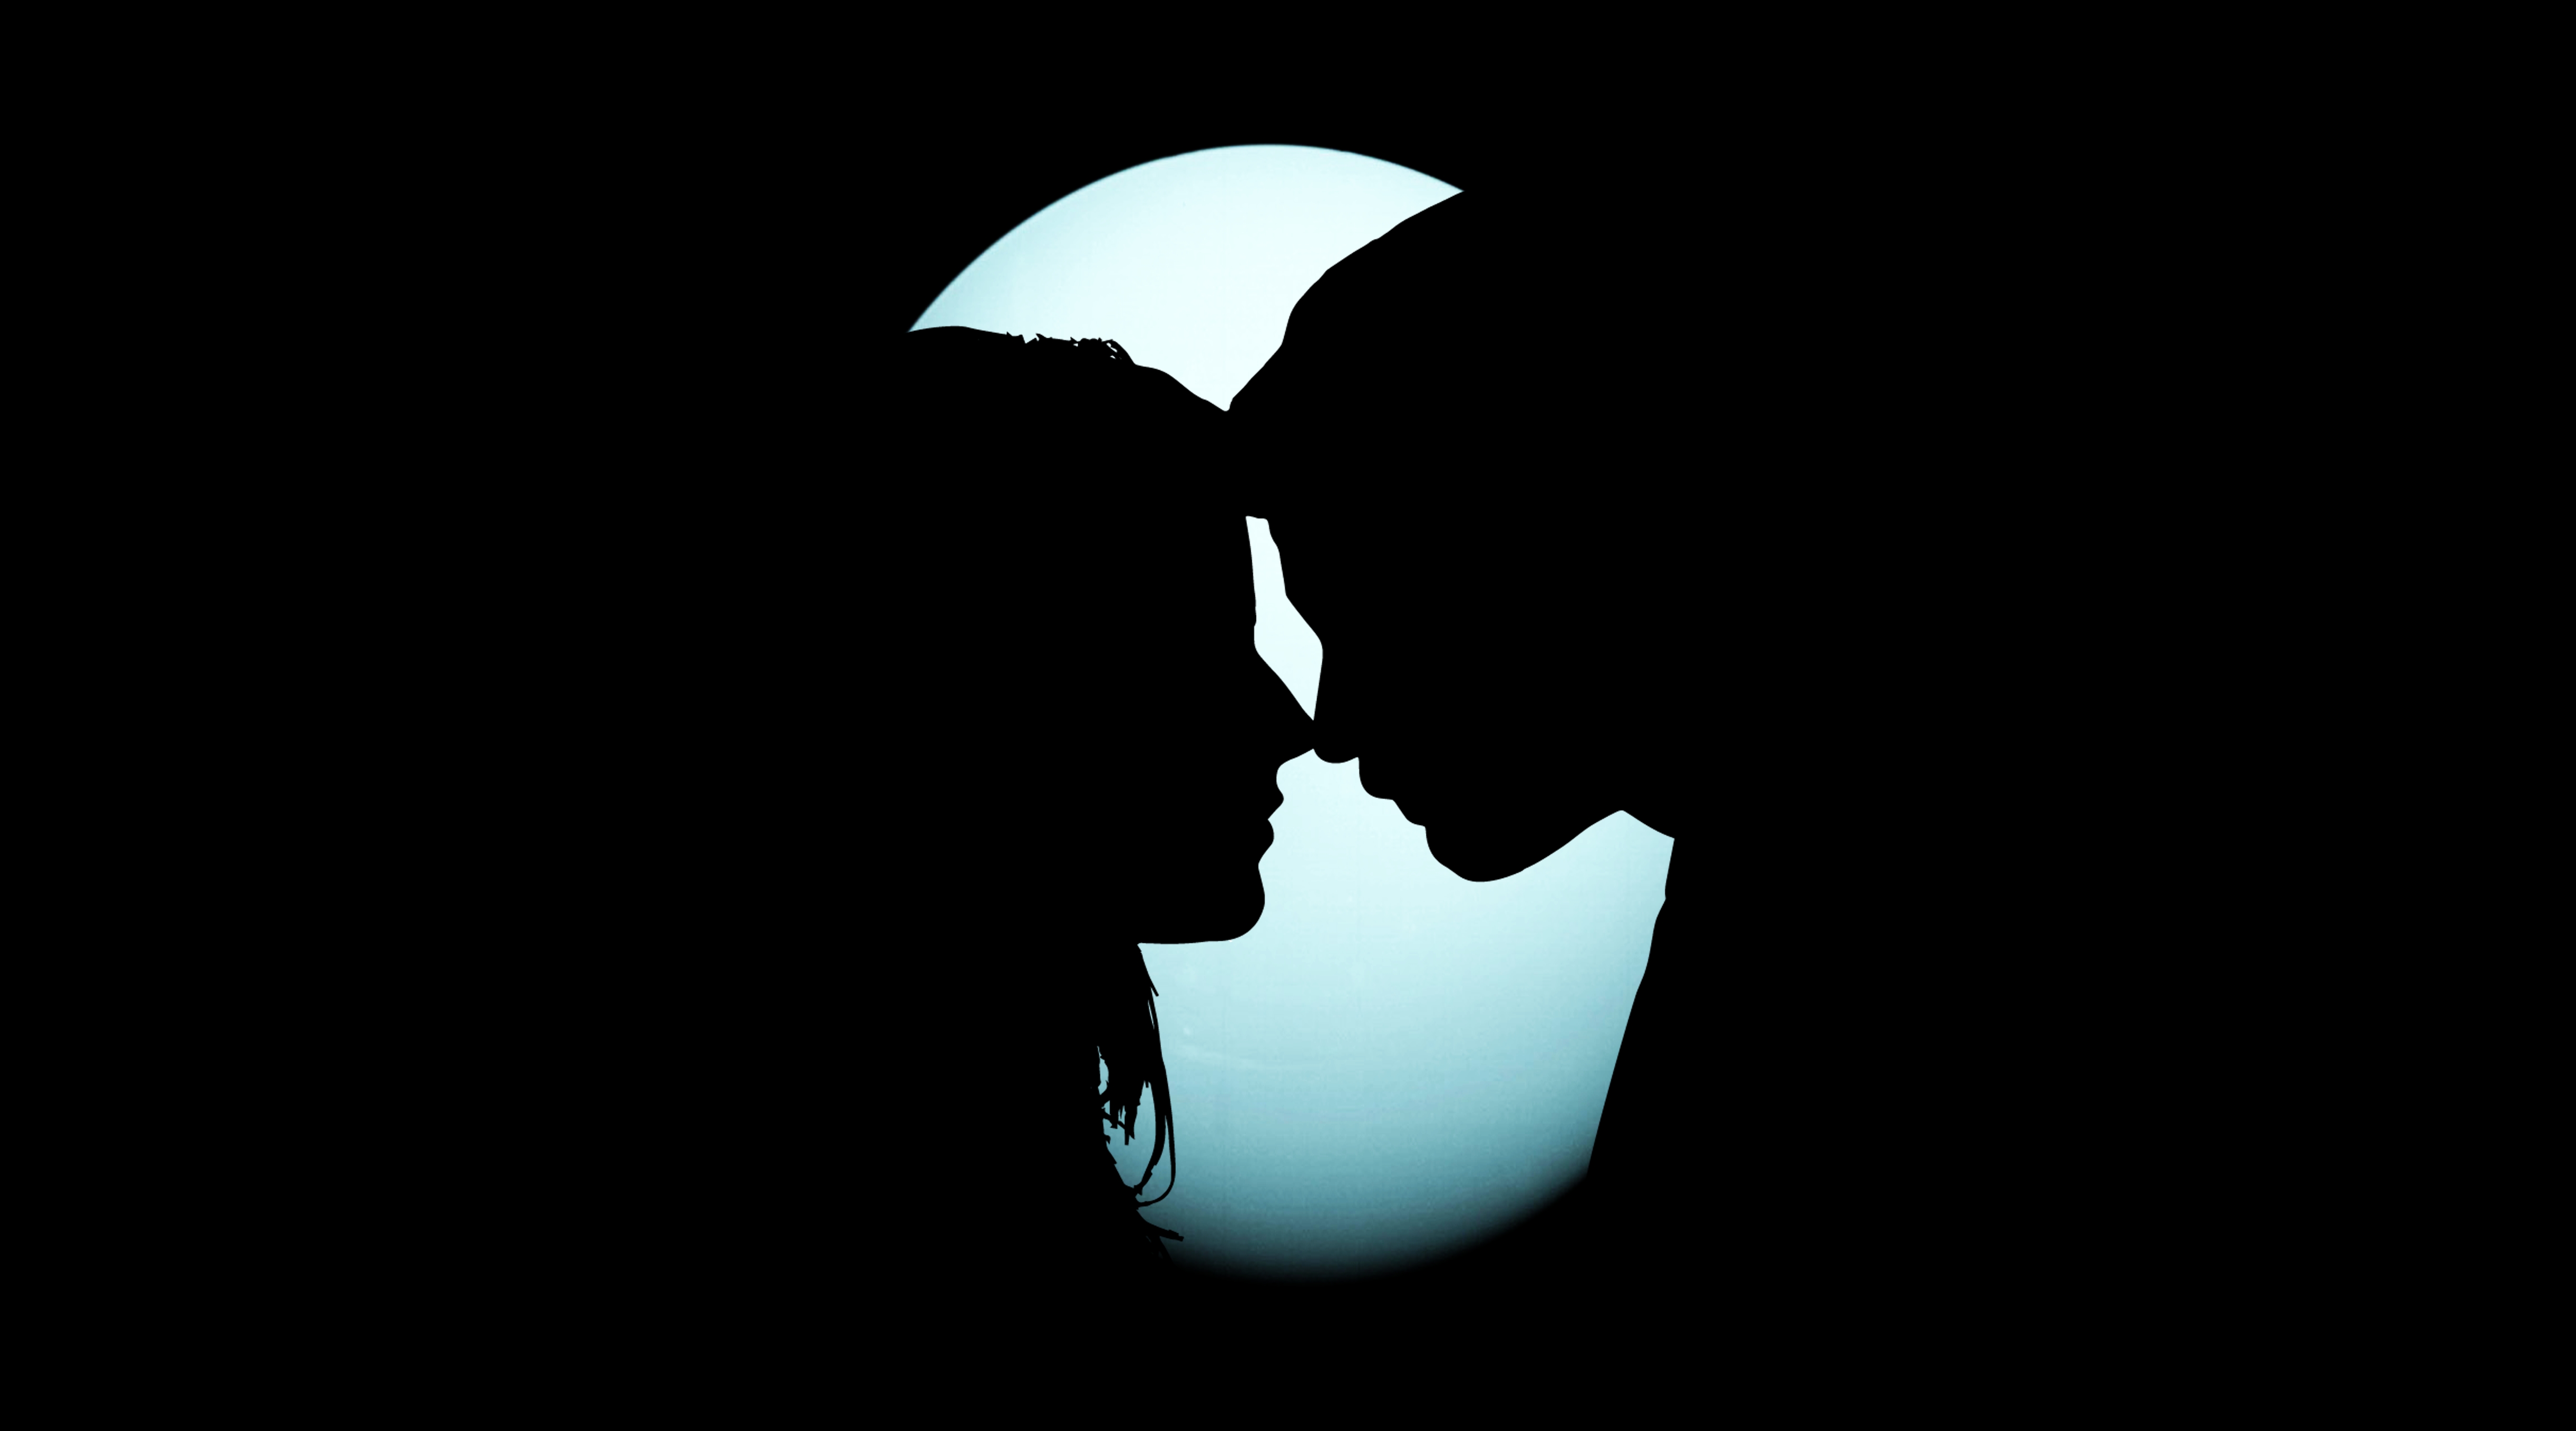 HD wallpaper, 5K, Moon, Together, Couple, Black Background, Silhouette, Romantic